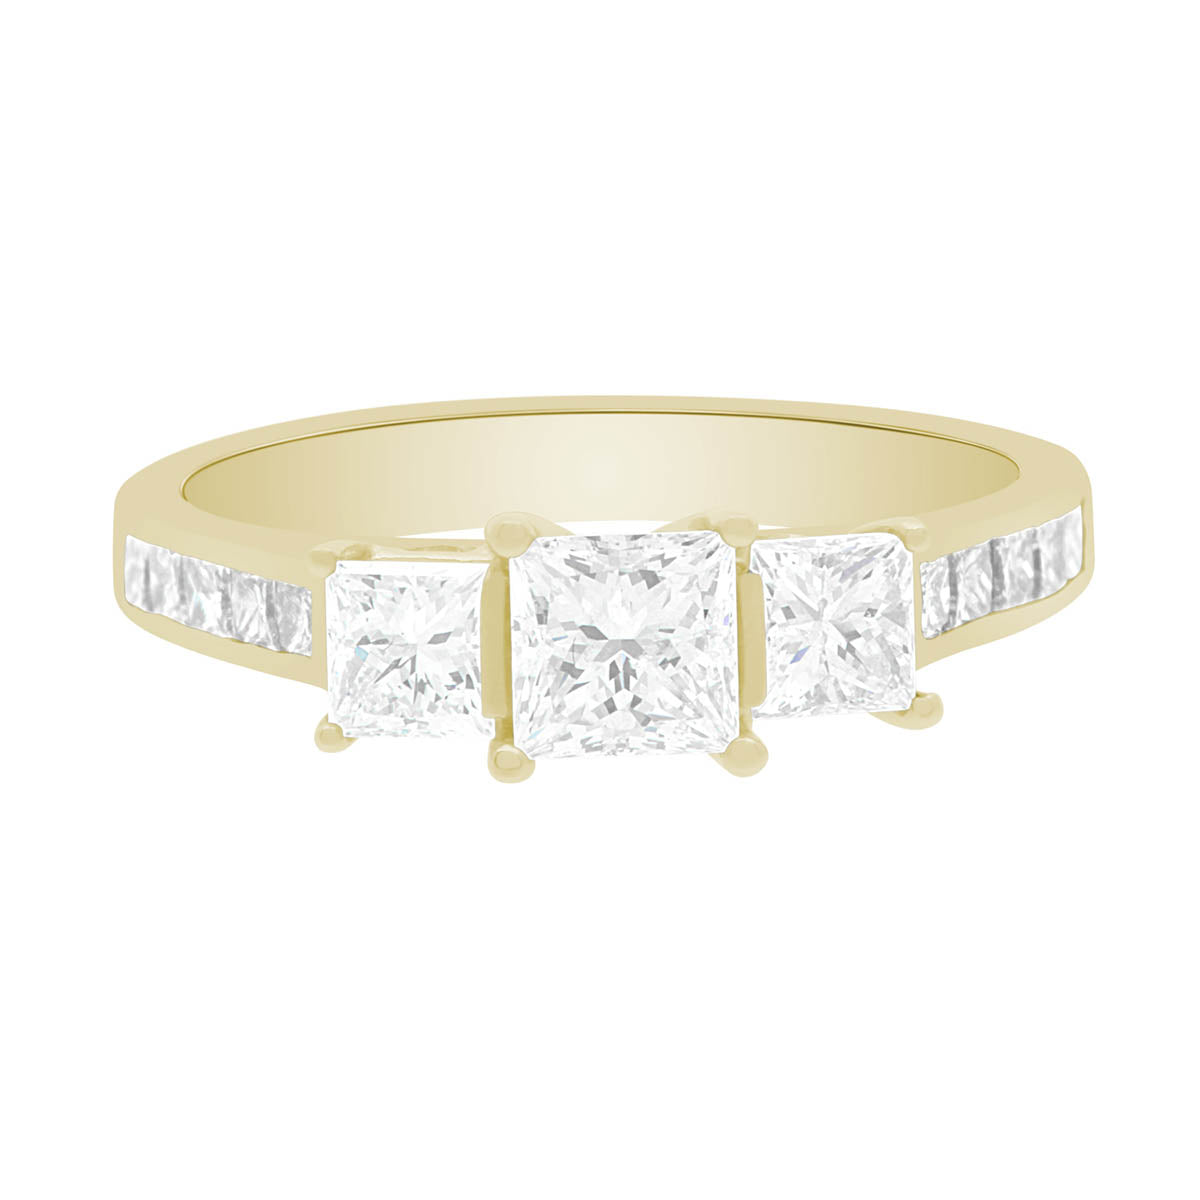 Princess Cut Trilogy Engagement Ring in yellow gold